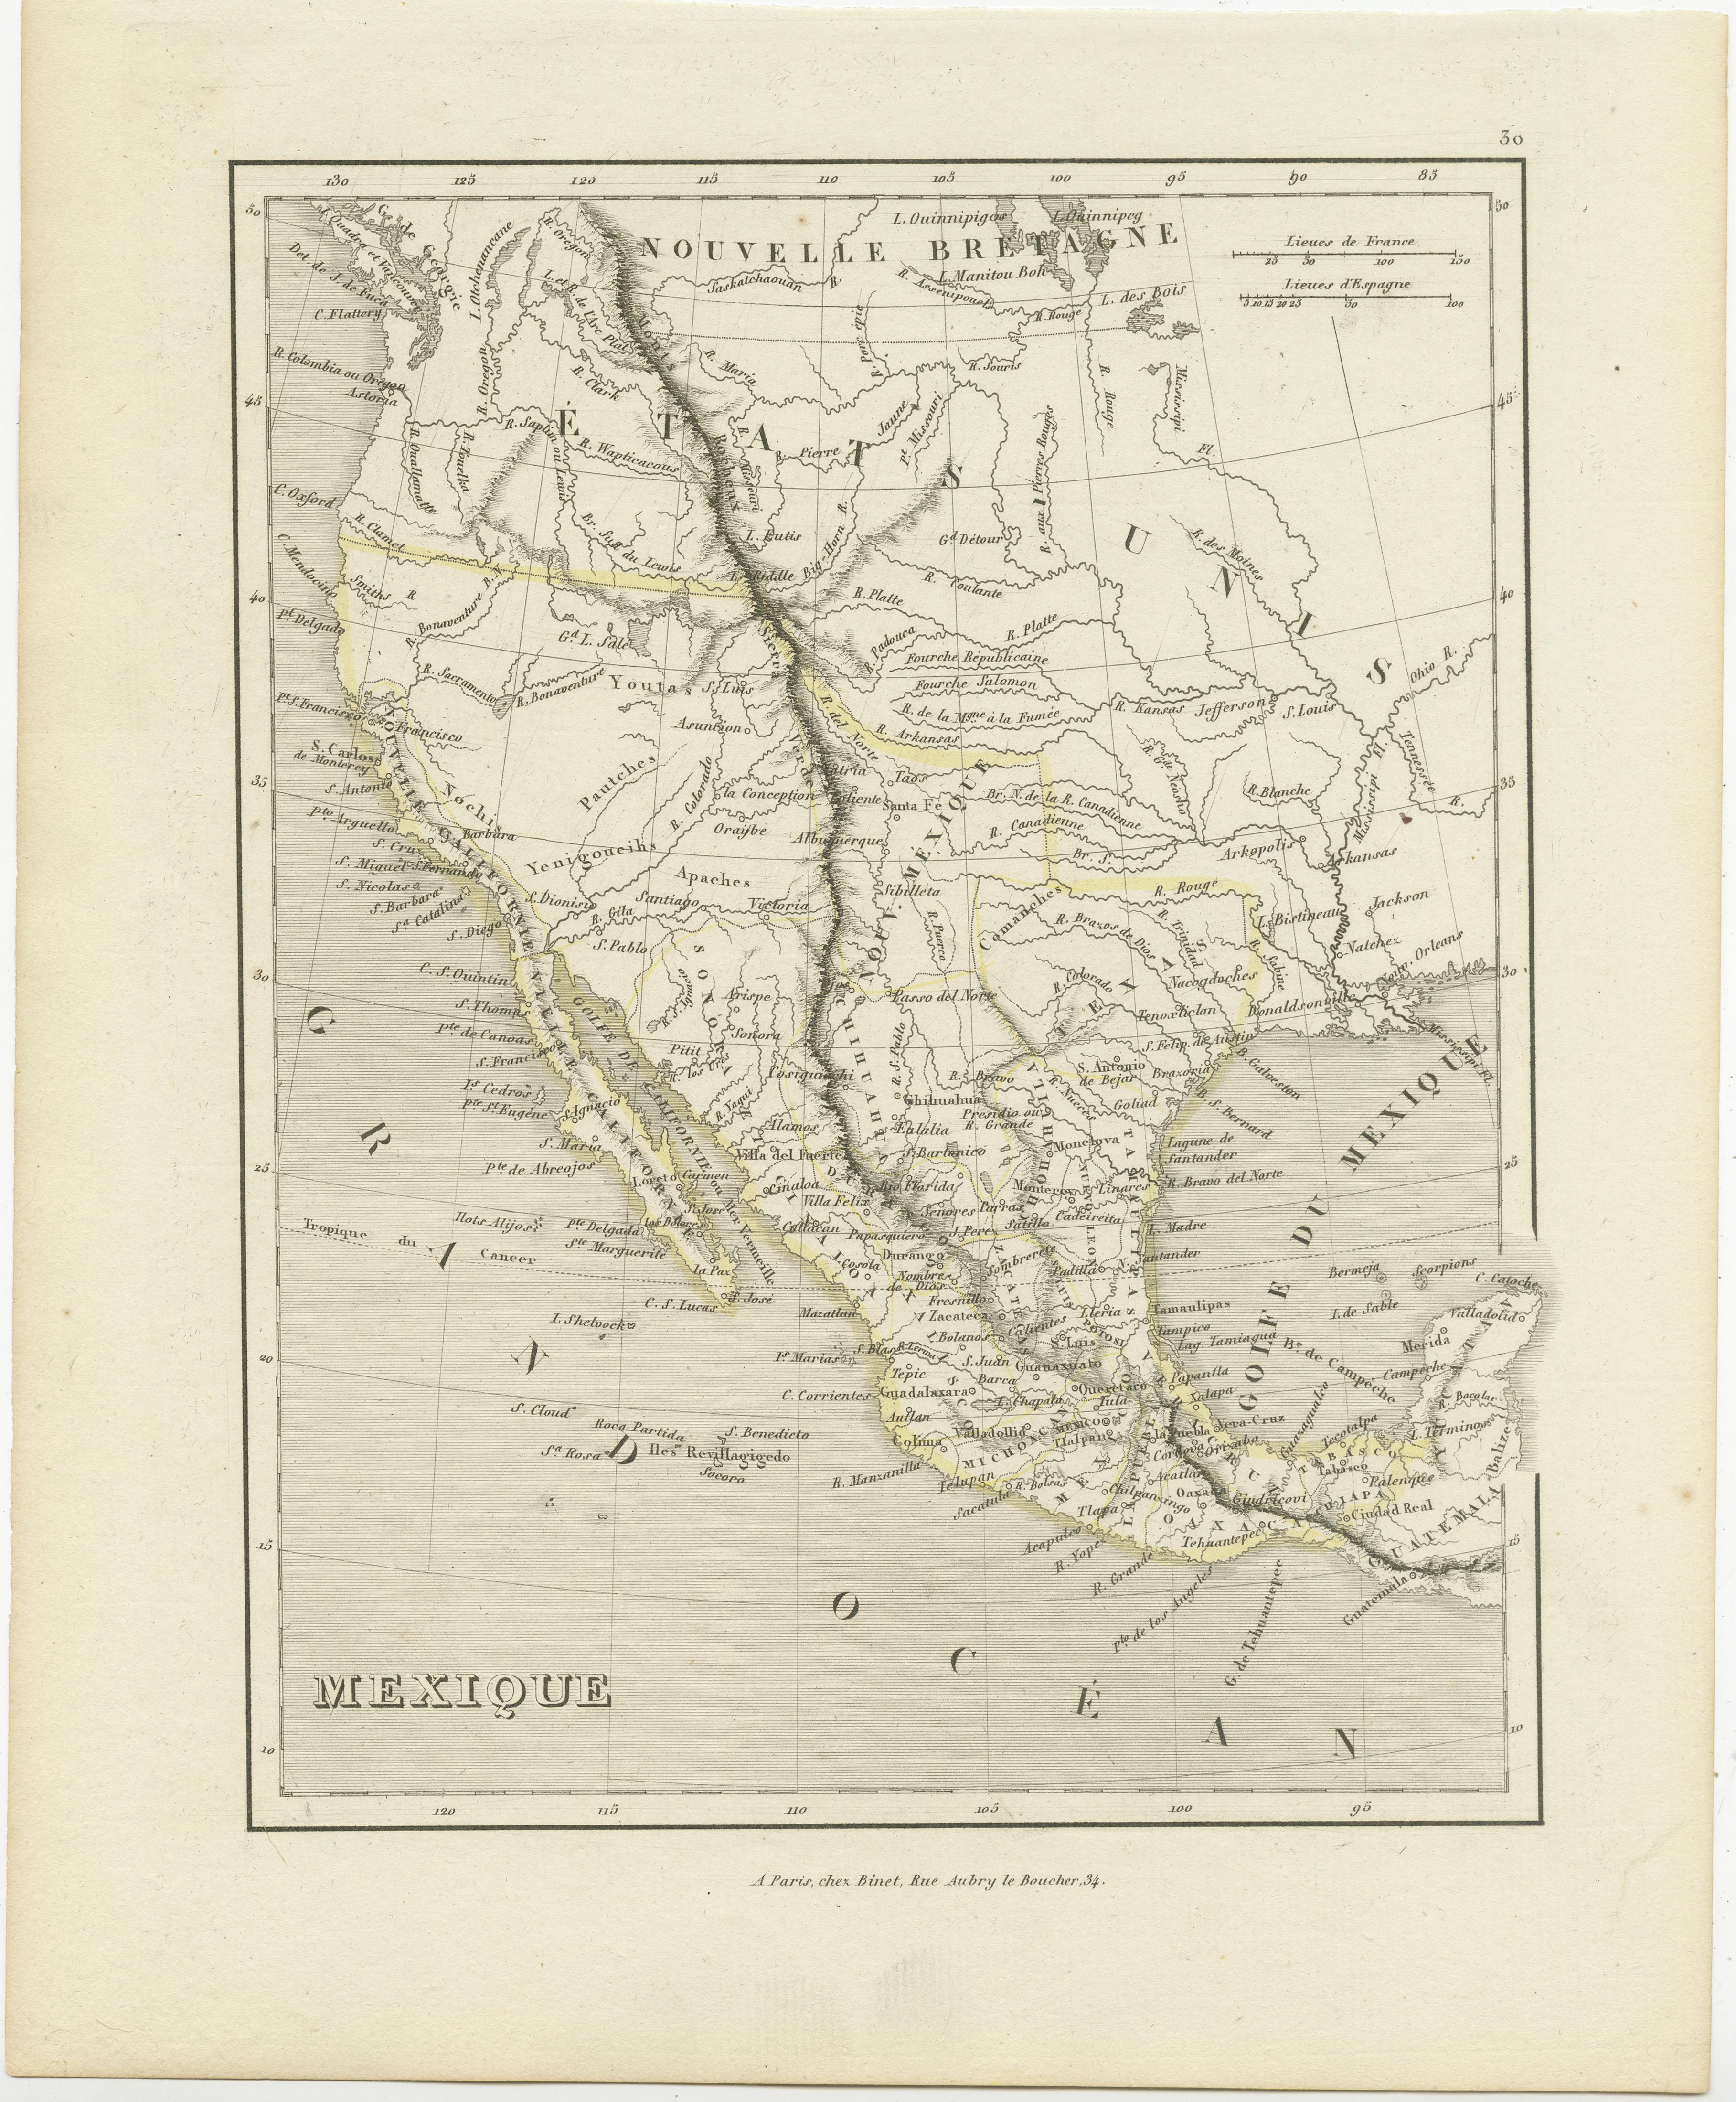 Antique map titled 'Mexique'. This map covers the western United States, Mexico and the independent Republic of Texas. Mexico controls all of the Southwest and the United States extends well into present-day British Columbia in the Northwest. A